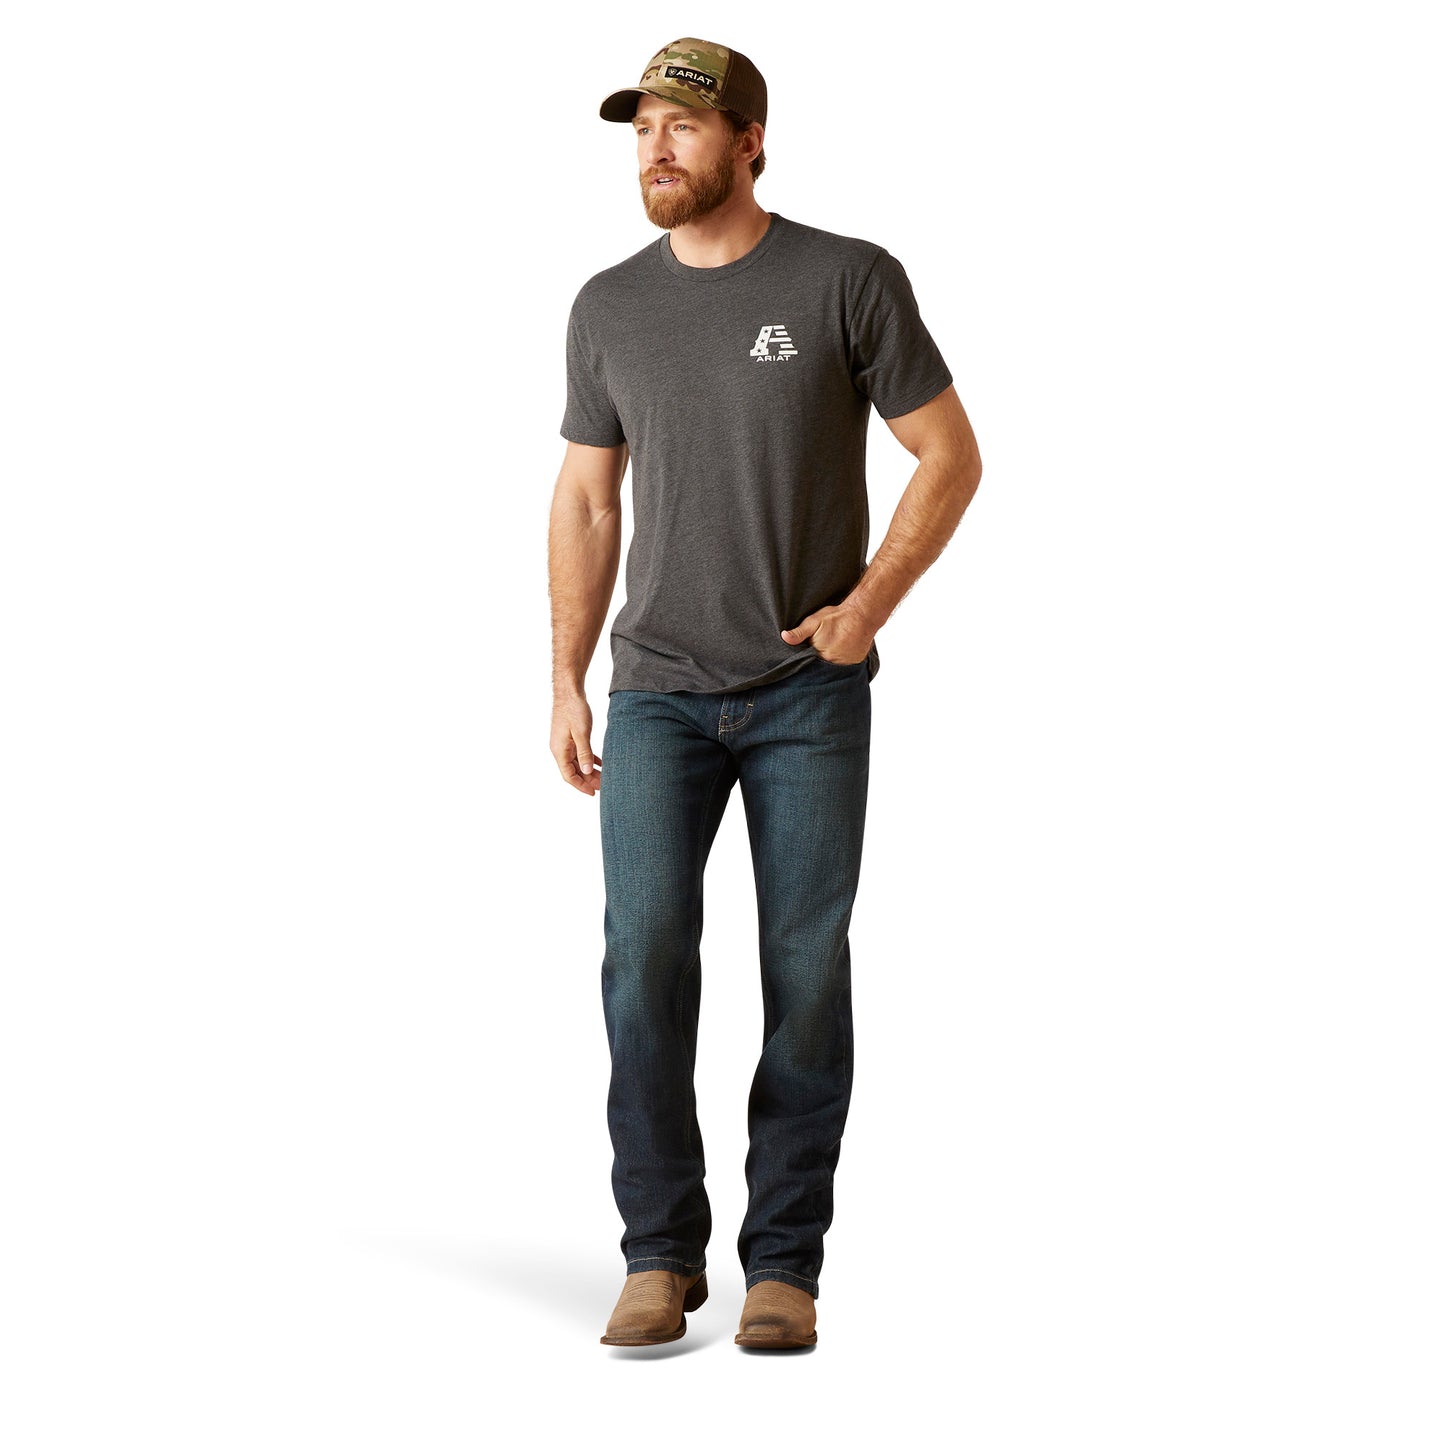 Ariat Men's US A Graphic Charcoal Heather T-Shirt 10047656